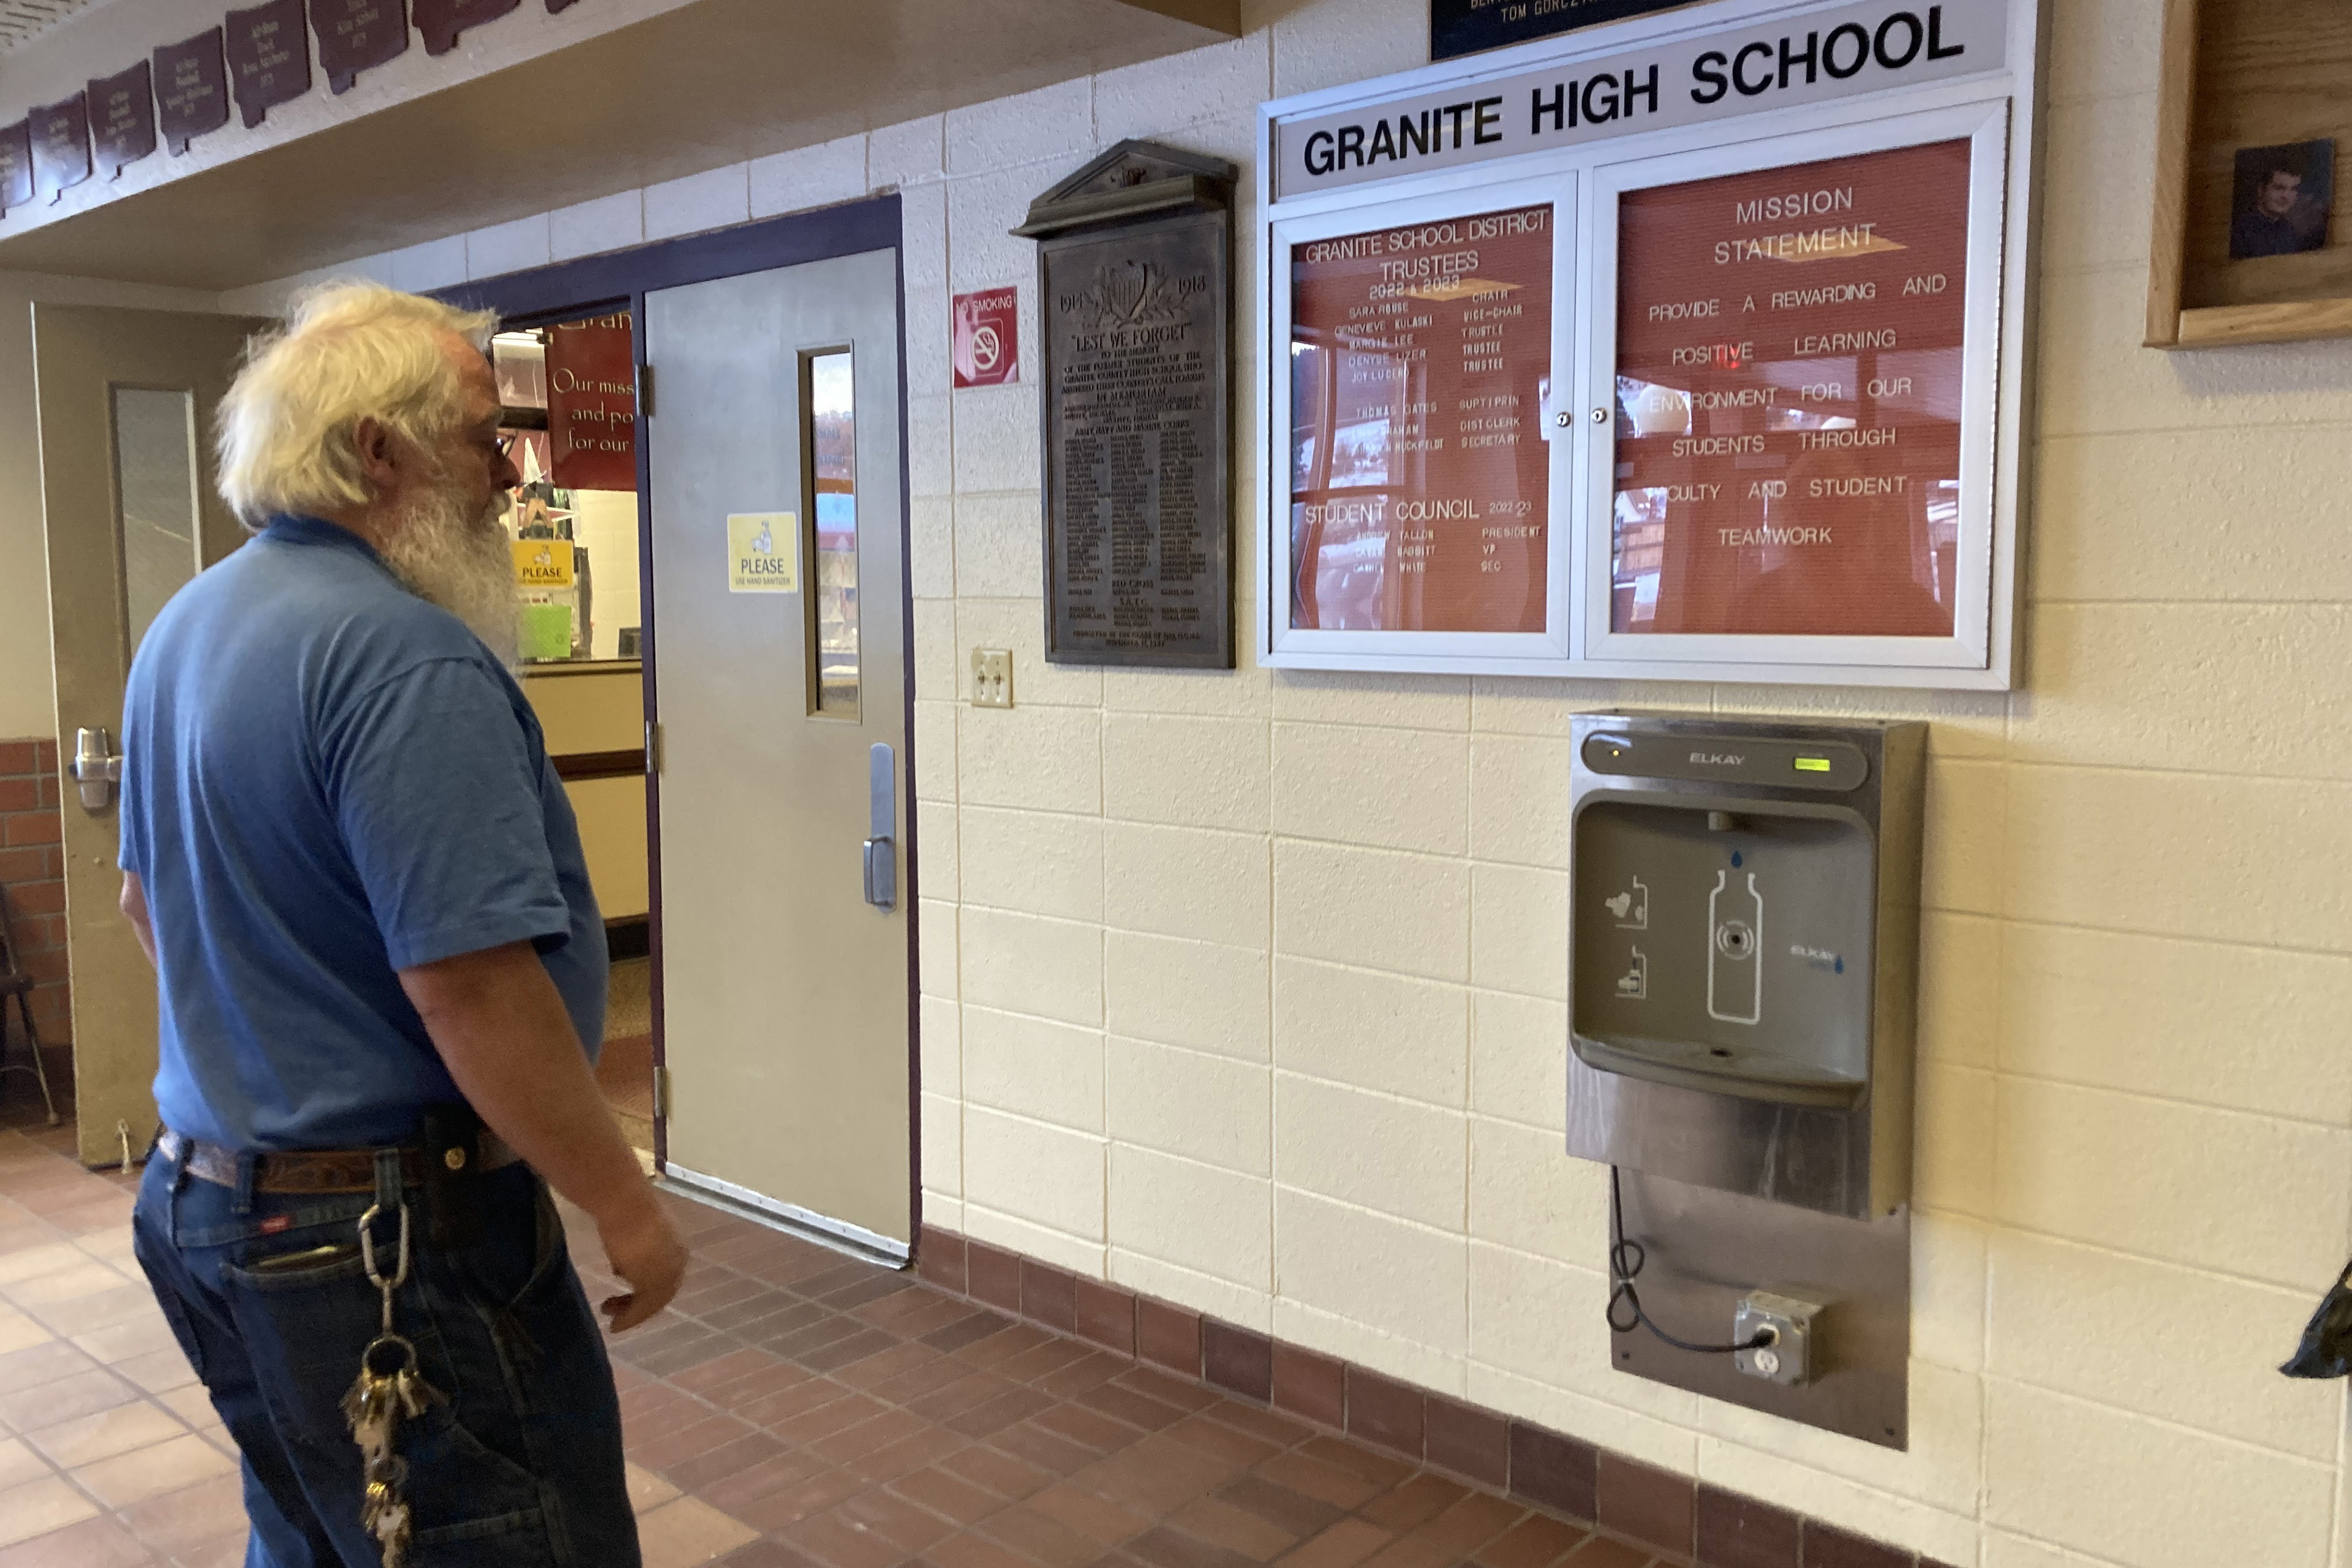 Chris Cornelius stands in front of a filtered water bottle station in a school hallway.